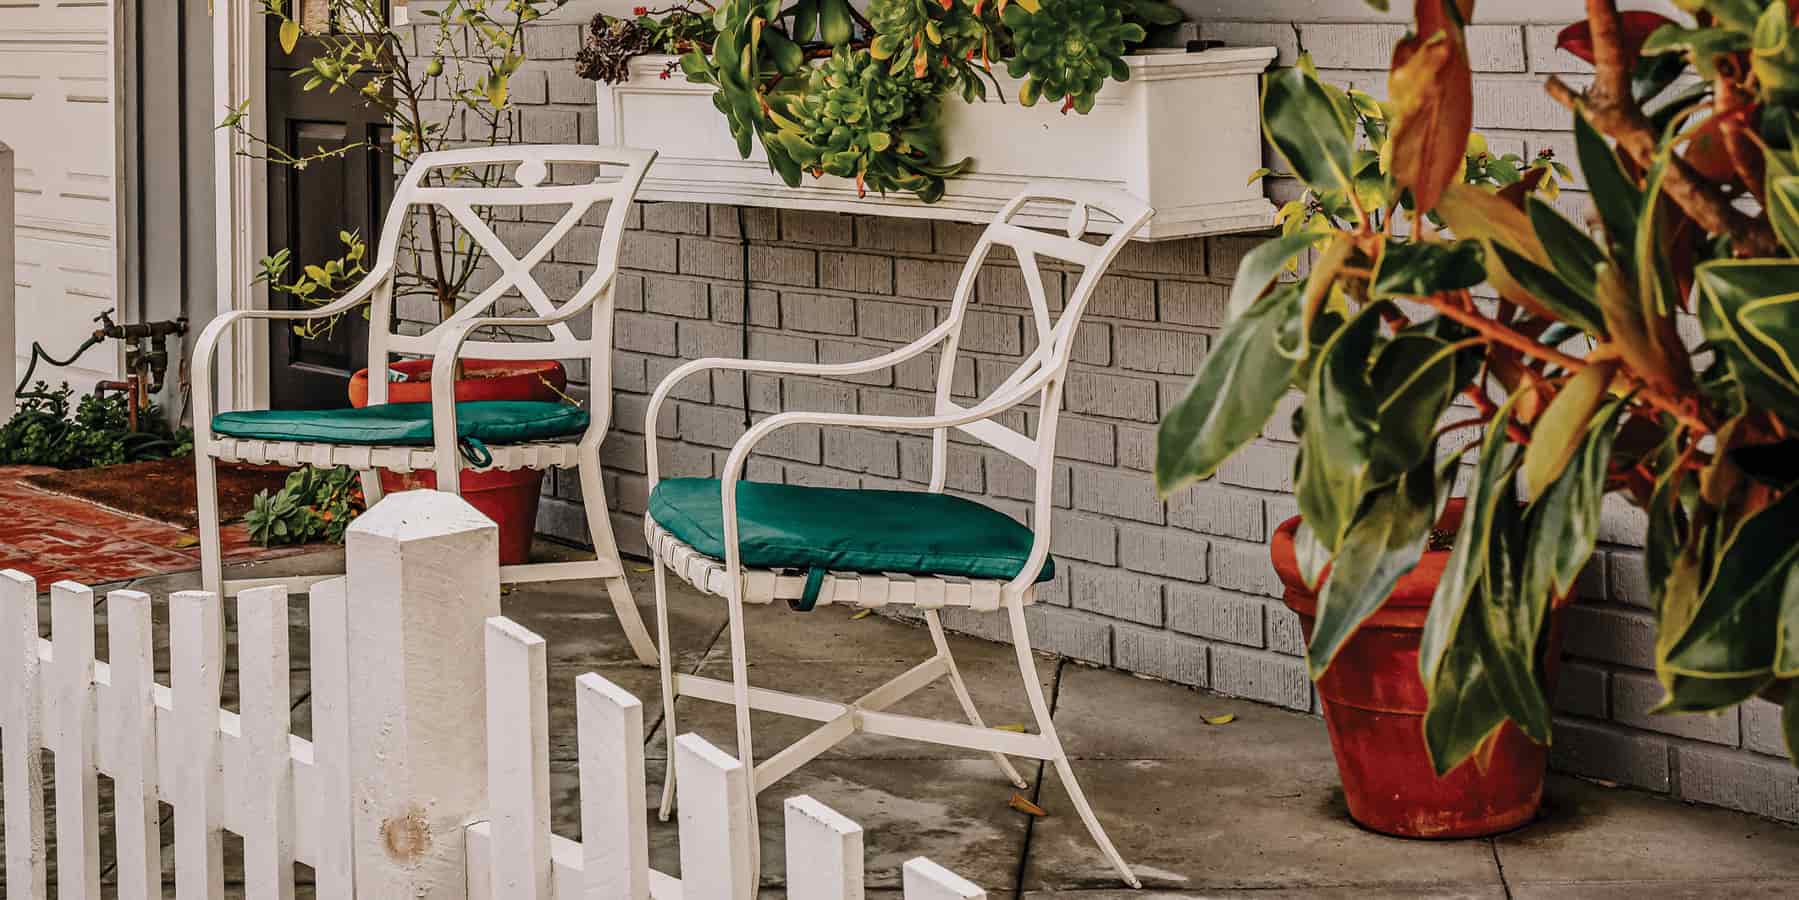 Two white chairs on a patio area with white fence around the porch.